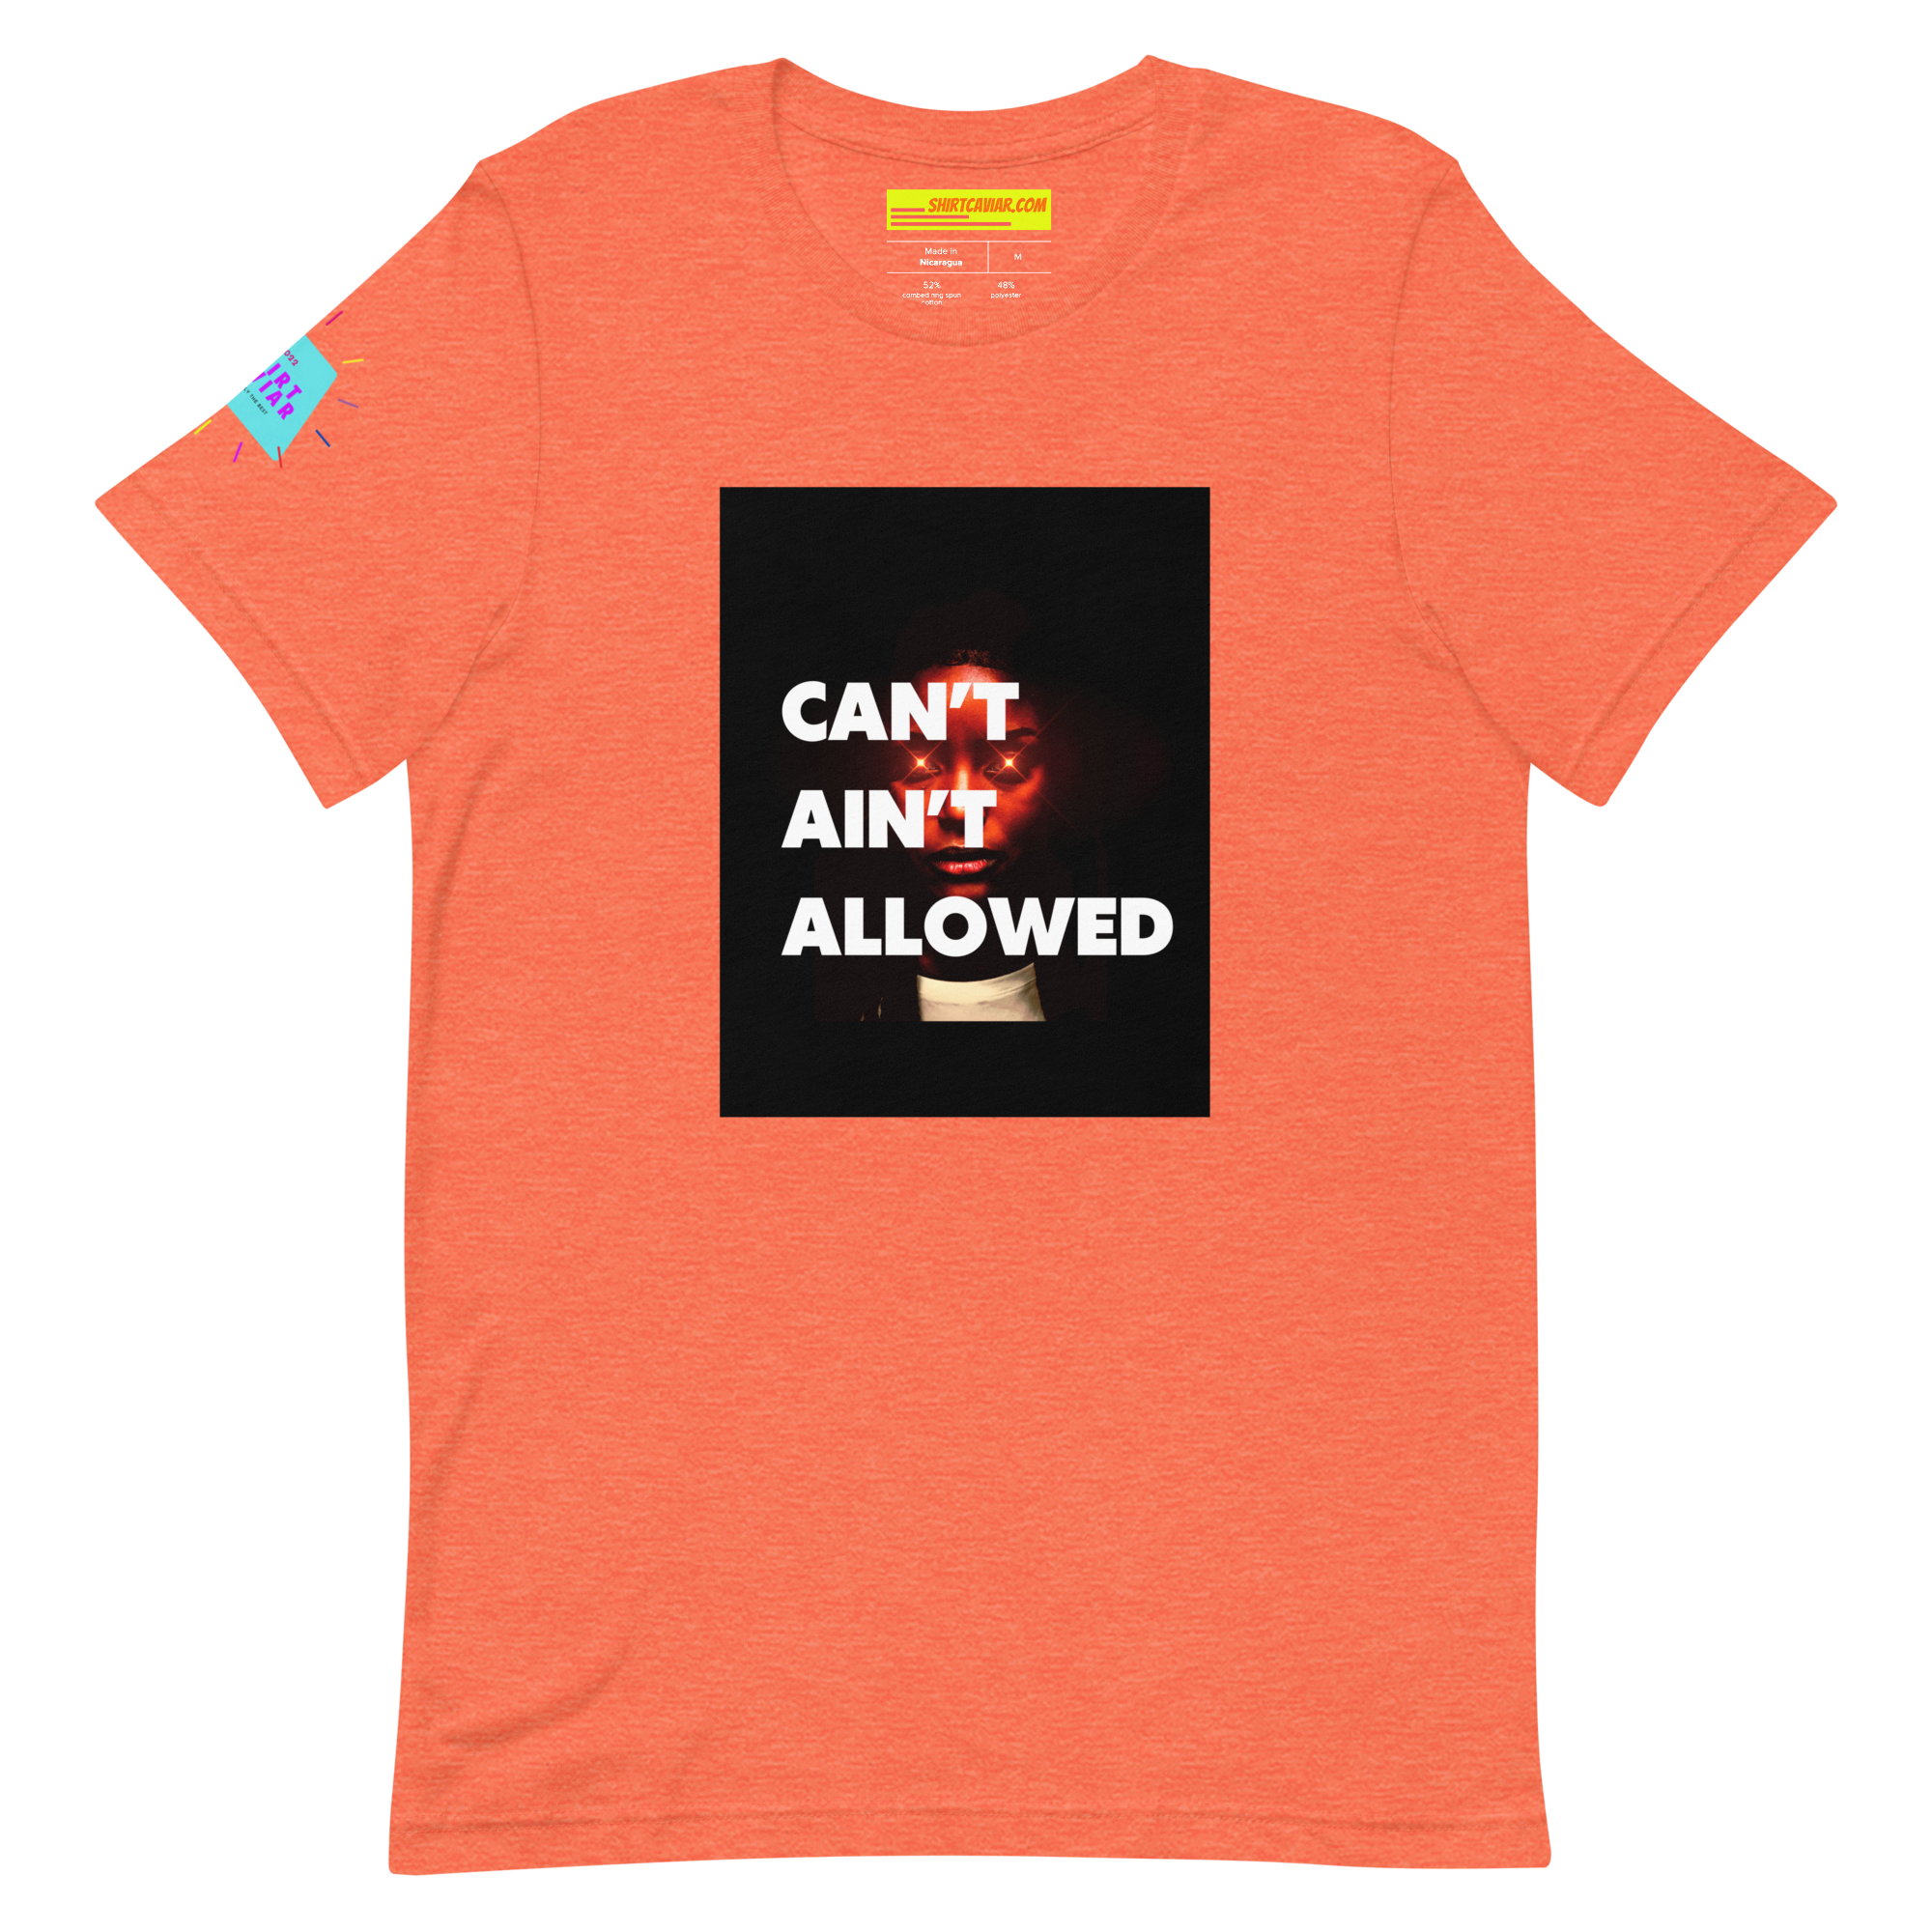 Can’t Ain’t Allowed Unisex t-shirt